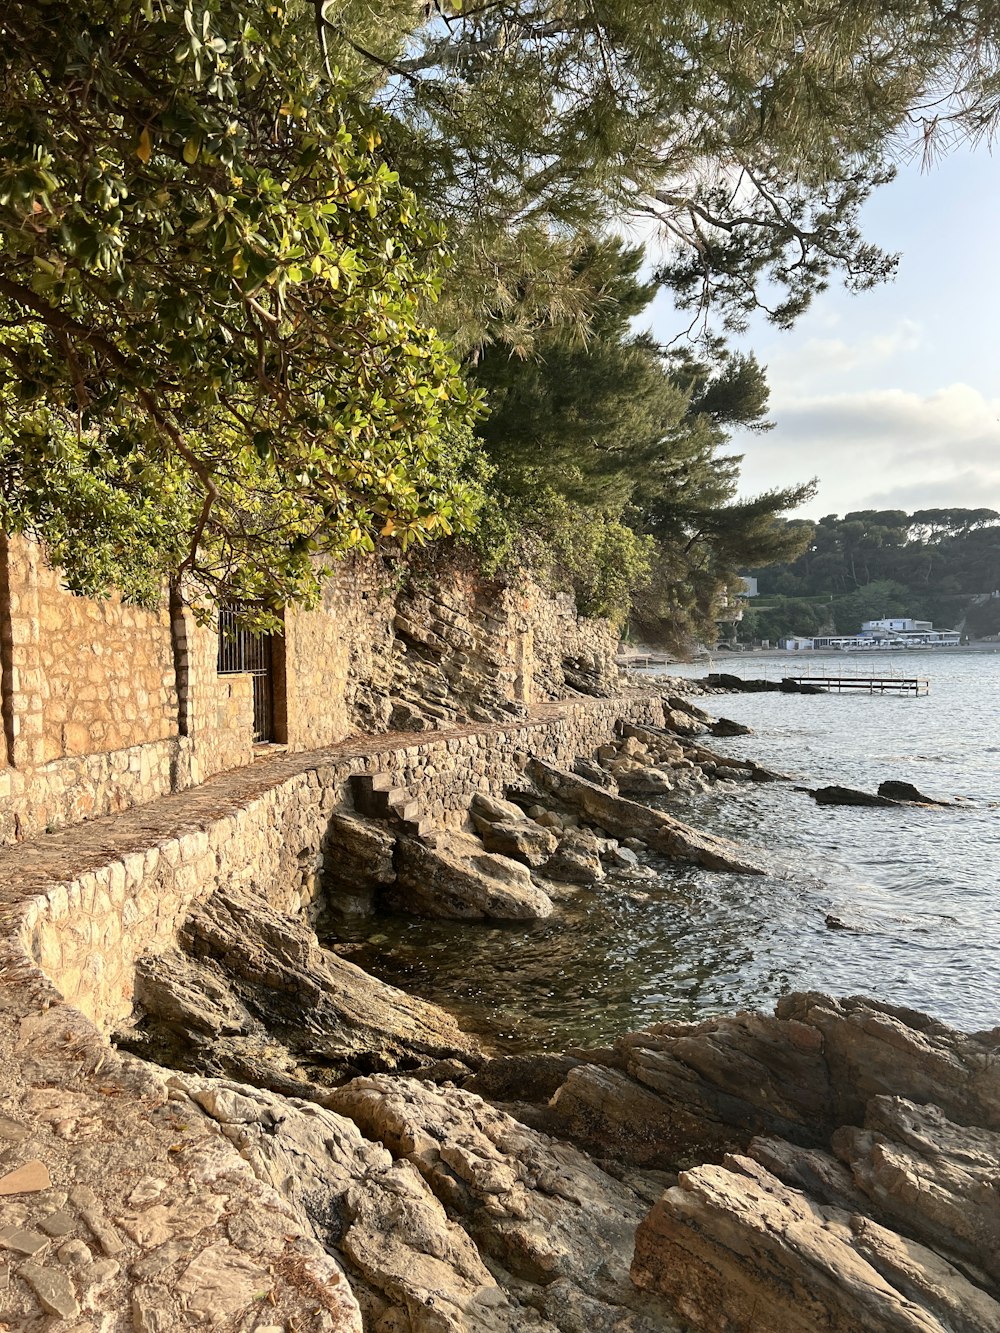 a stone wall next to a body of water